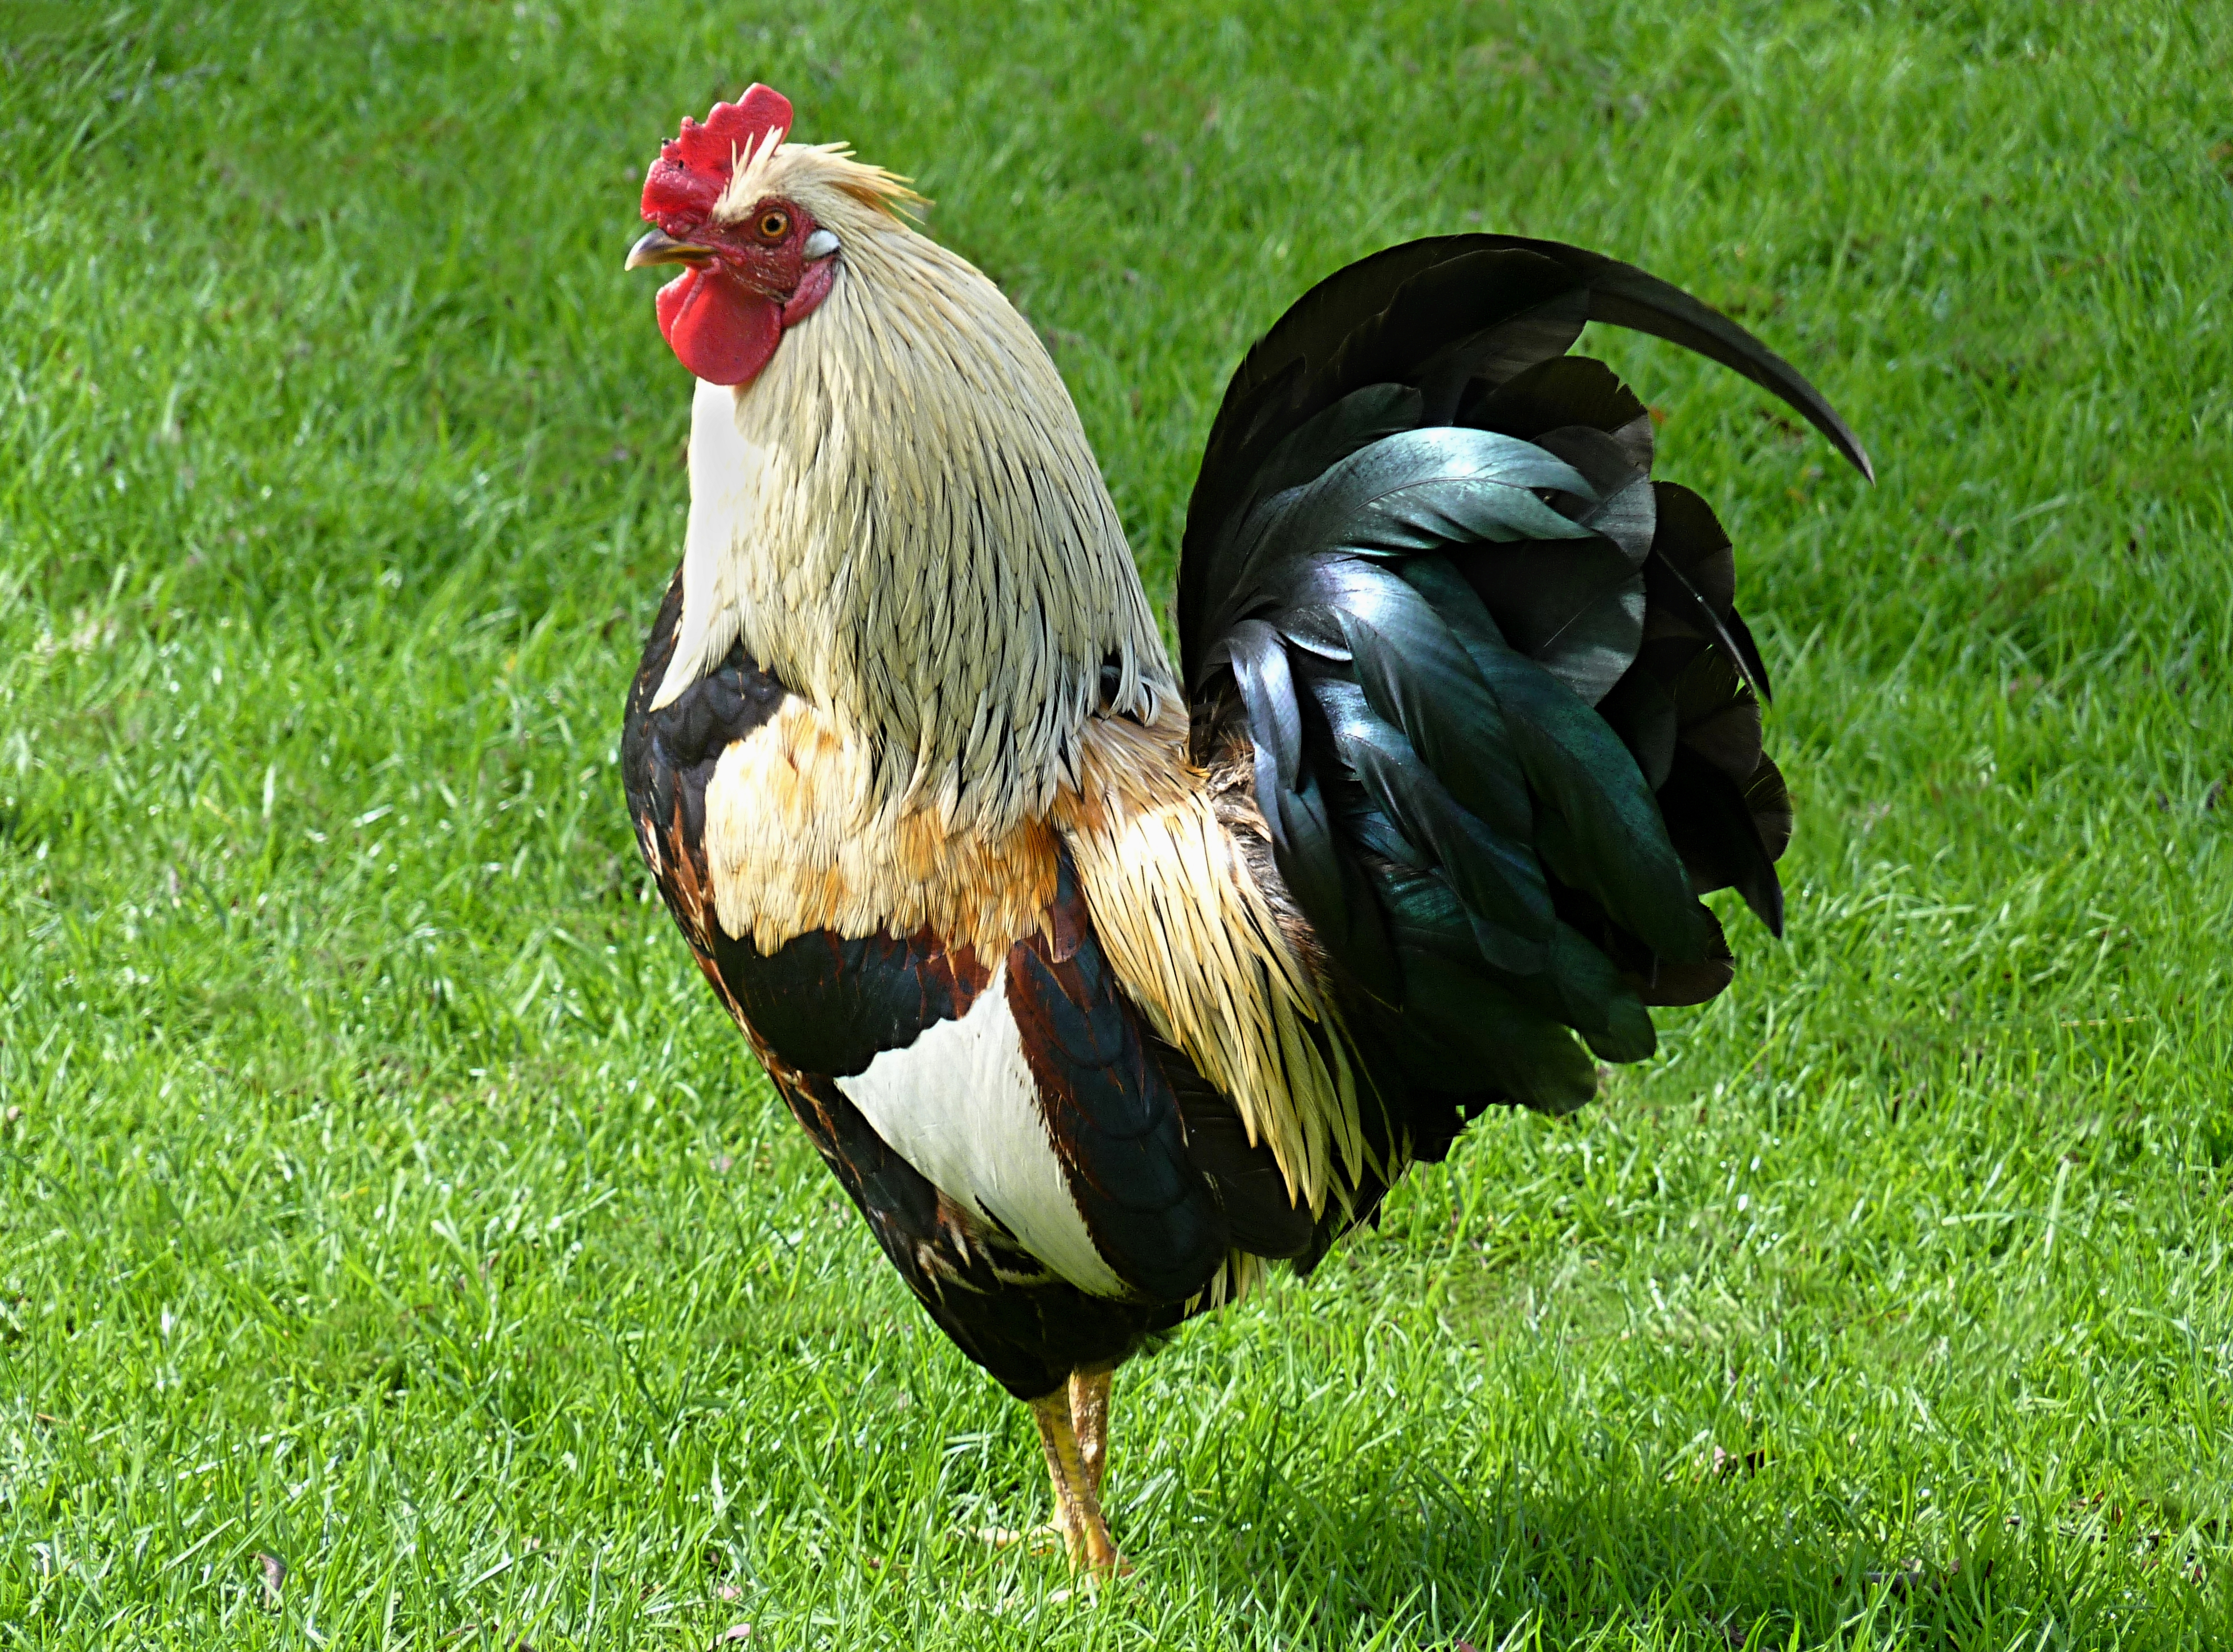 File:Rooster J2 - Wikimedia Commons